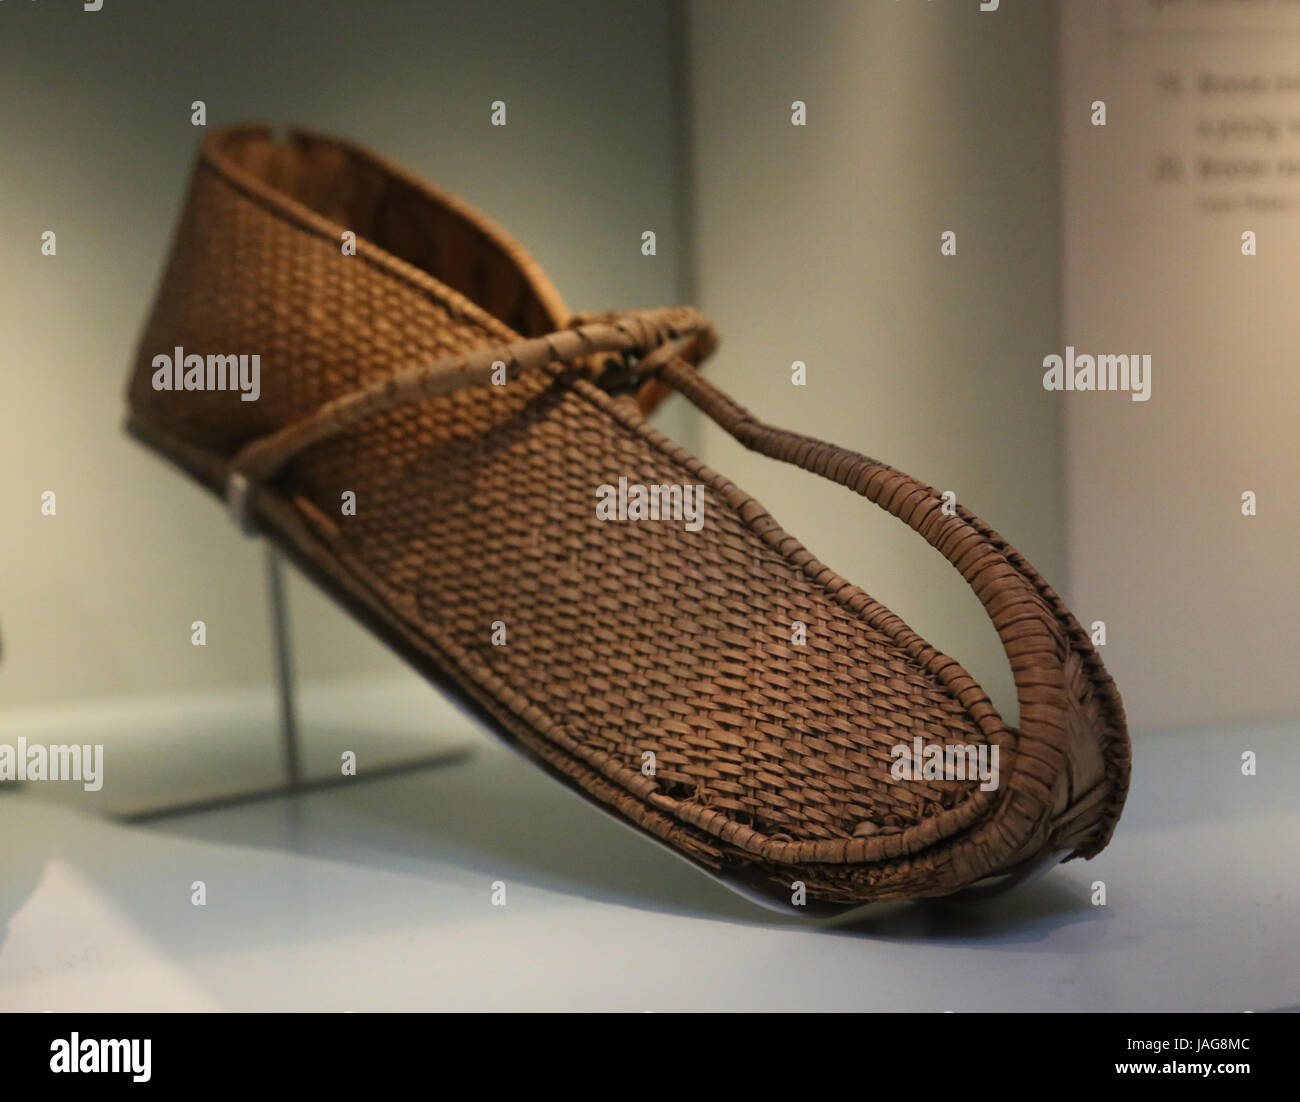 Ancient Egypt. Sandals woven from palm leaf. British Museum. London, UK  Stock Photo - Alamy